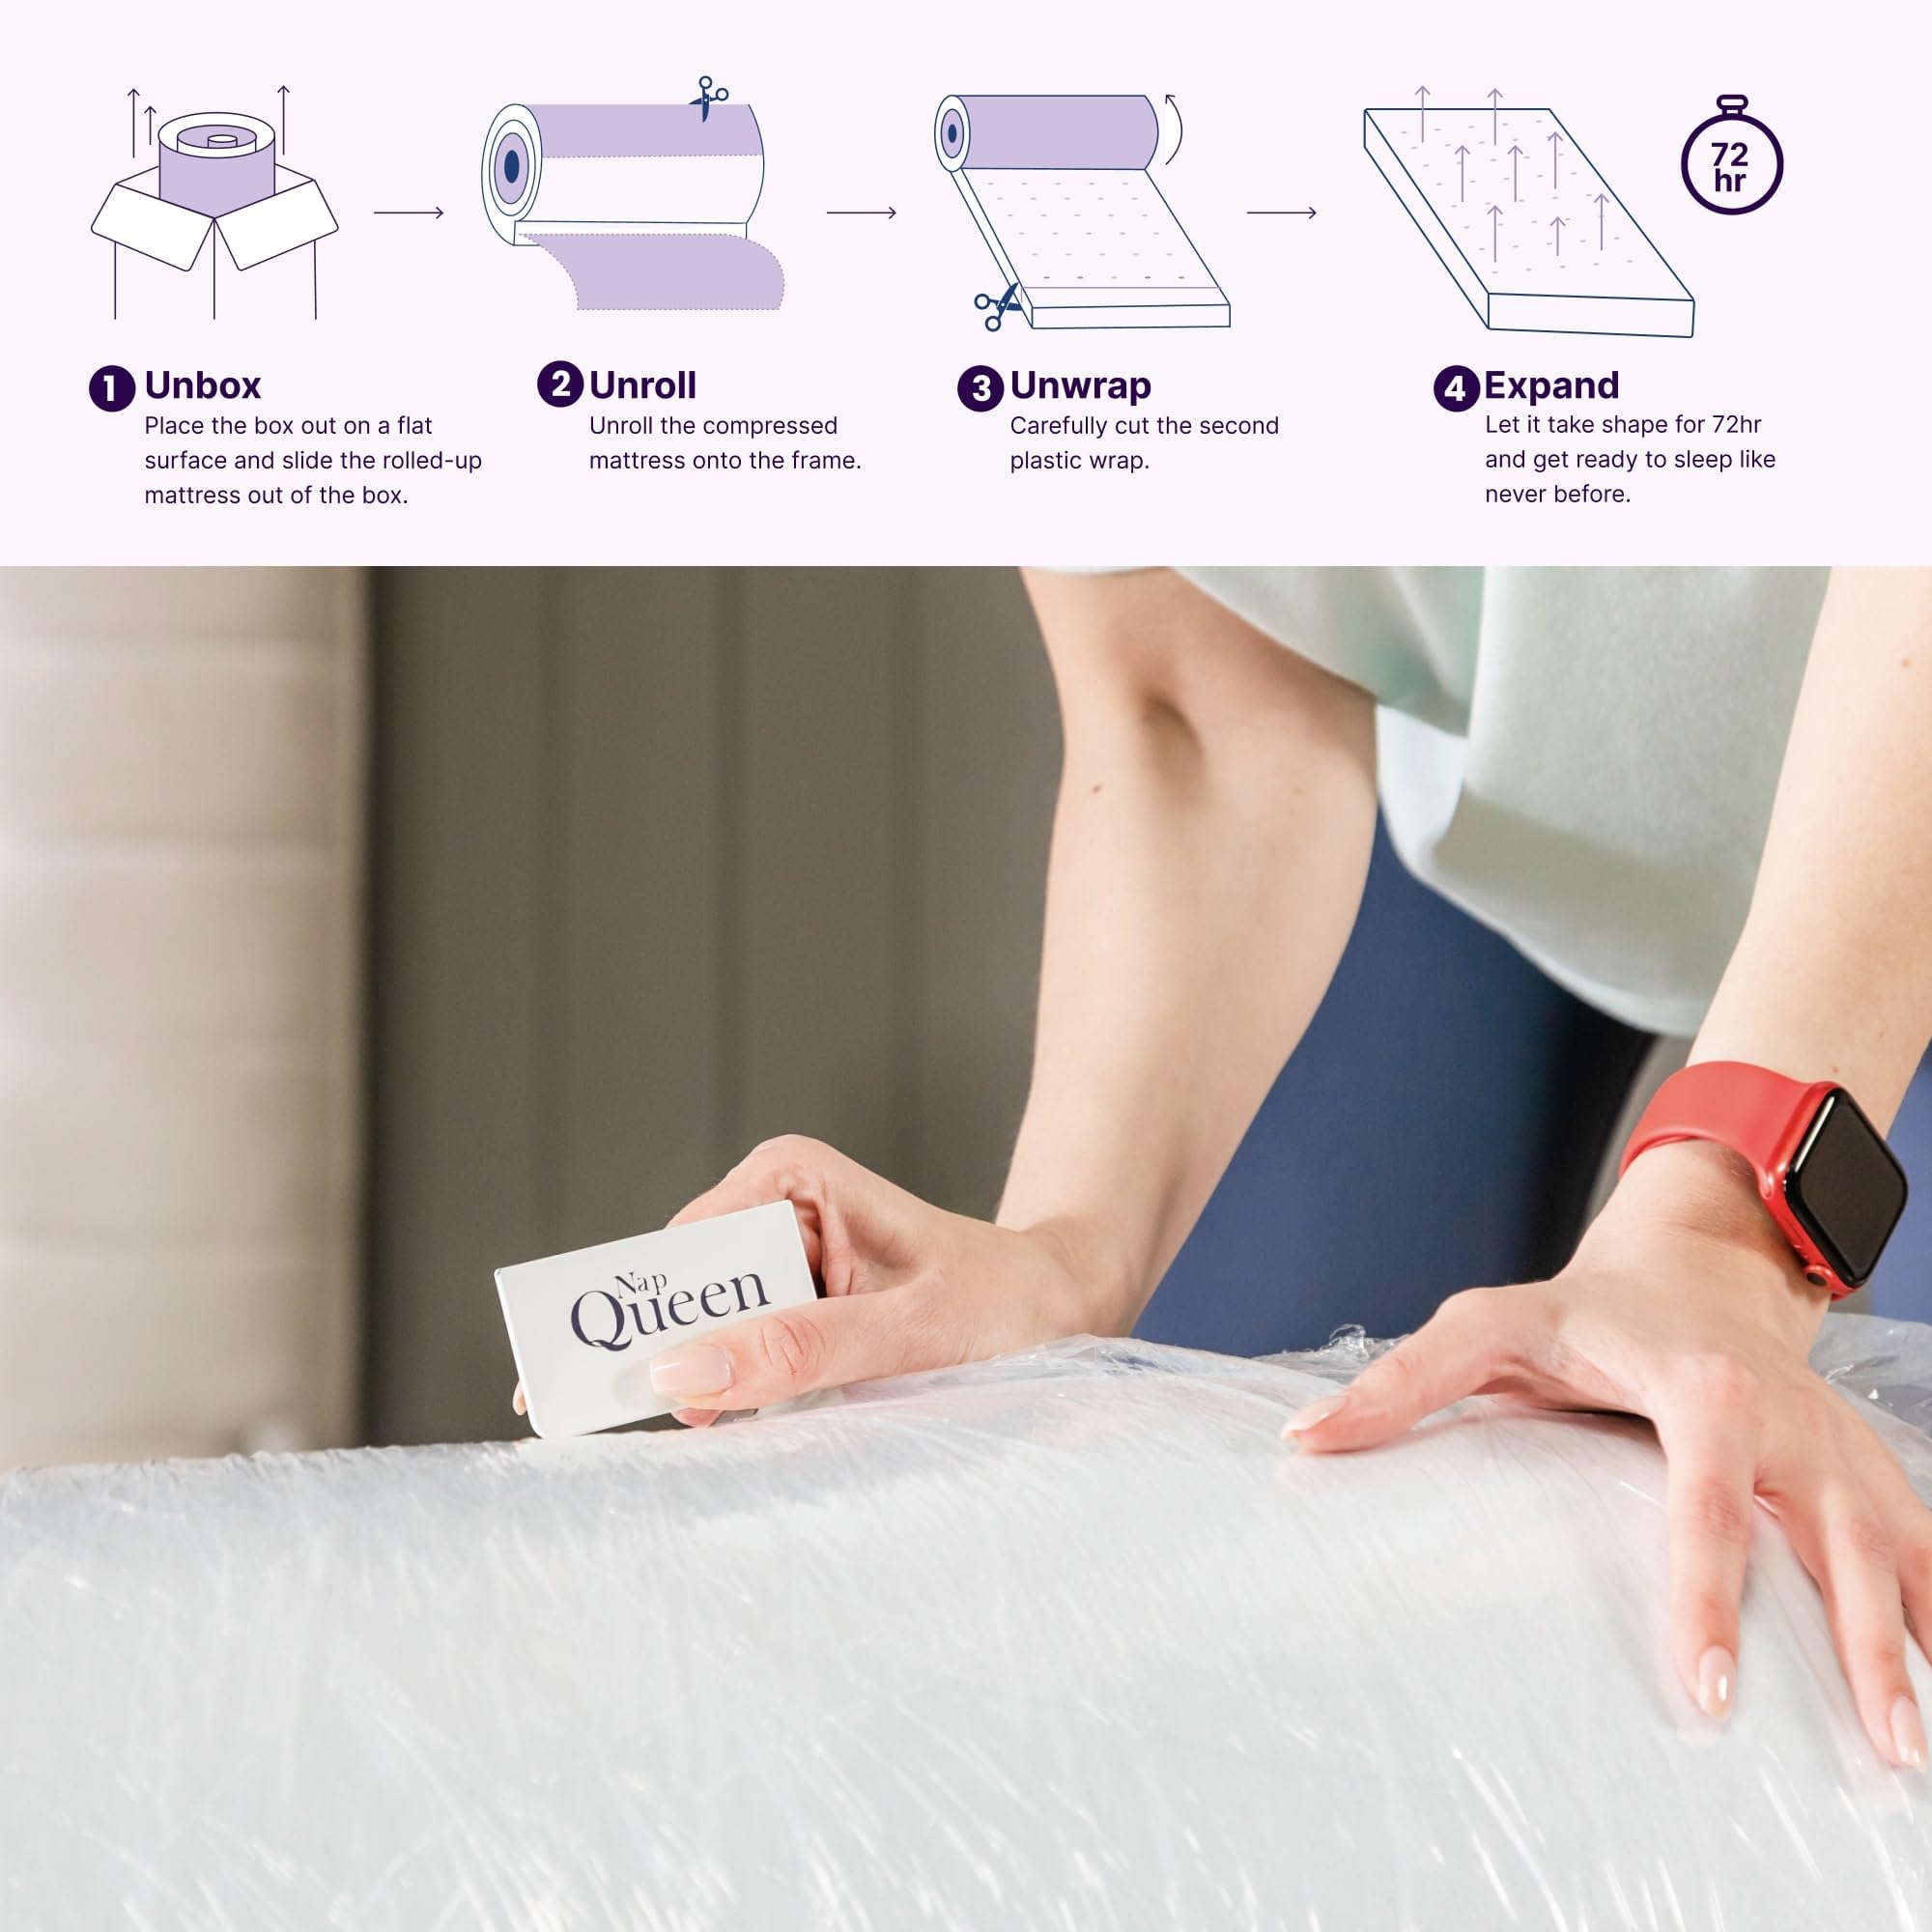 NapQueen Queen Mattress, 6 Inch Elizabeth Cooling Gel Memory Foam Mattress, Queen Bed Mattress in a Box, CertiPUR-US Certified, Medium Firm, Breathable Soft Fabric Cover